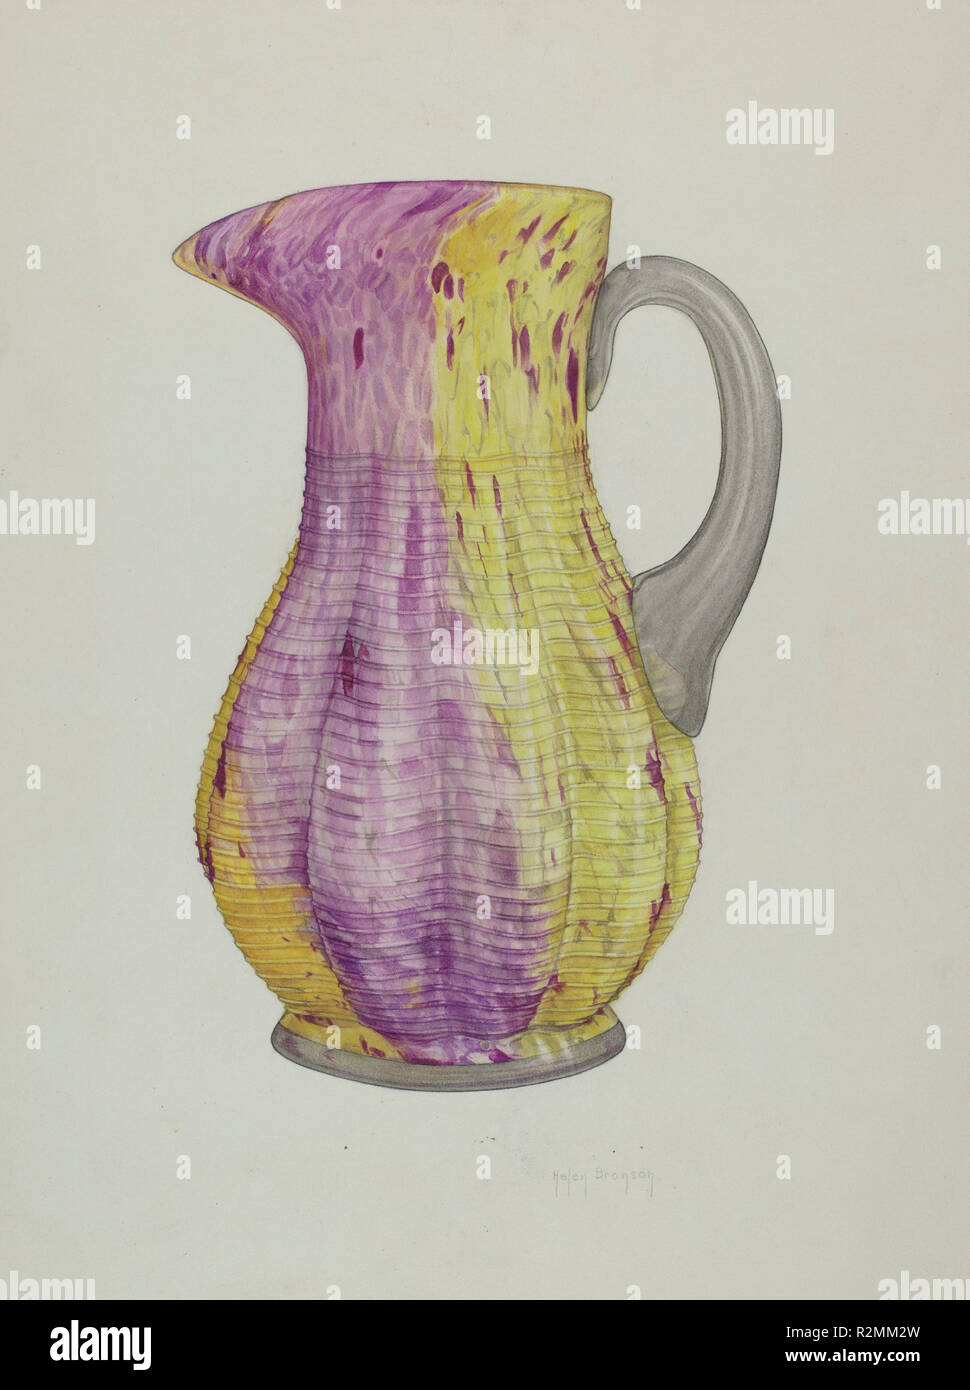 Glass Water Pitcher. Dated: c. 1938. Medium: watercolor and graphite on paper. Museum: National Gallery of Art, Washington DC. Author: Helen Bronson. Stock Photo